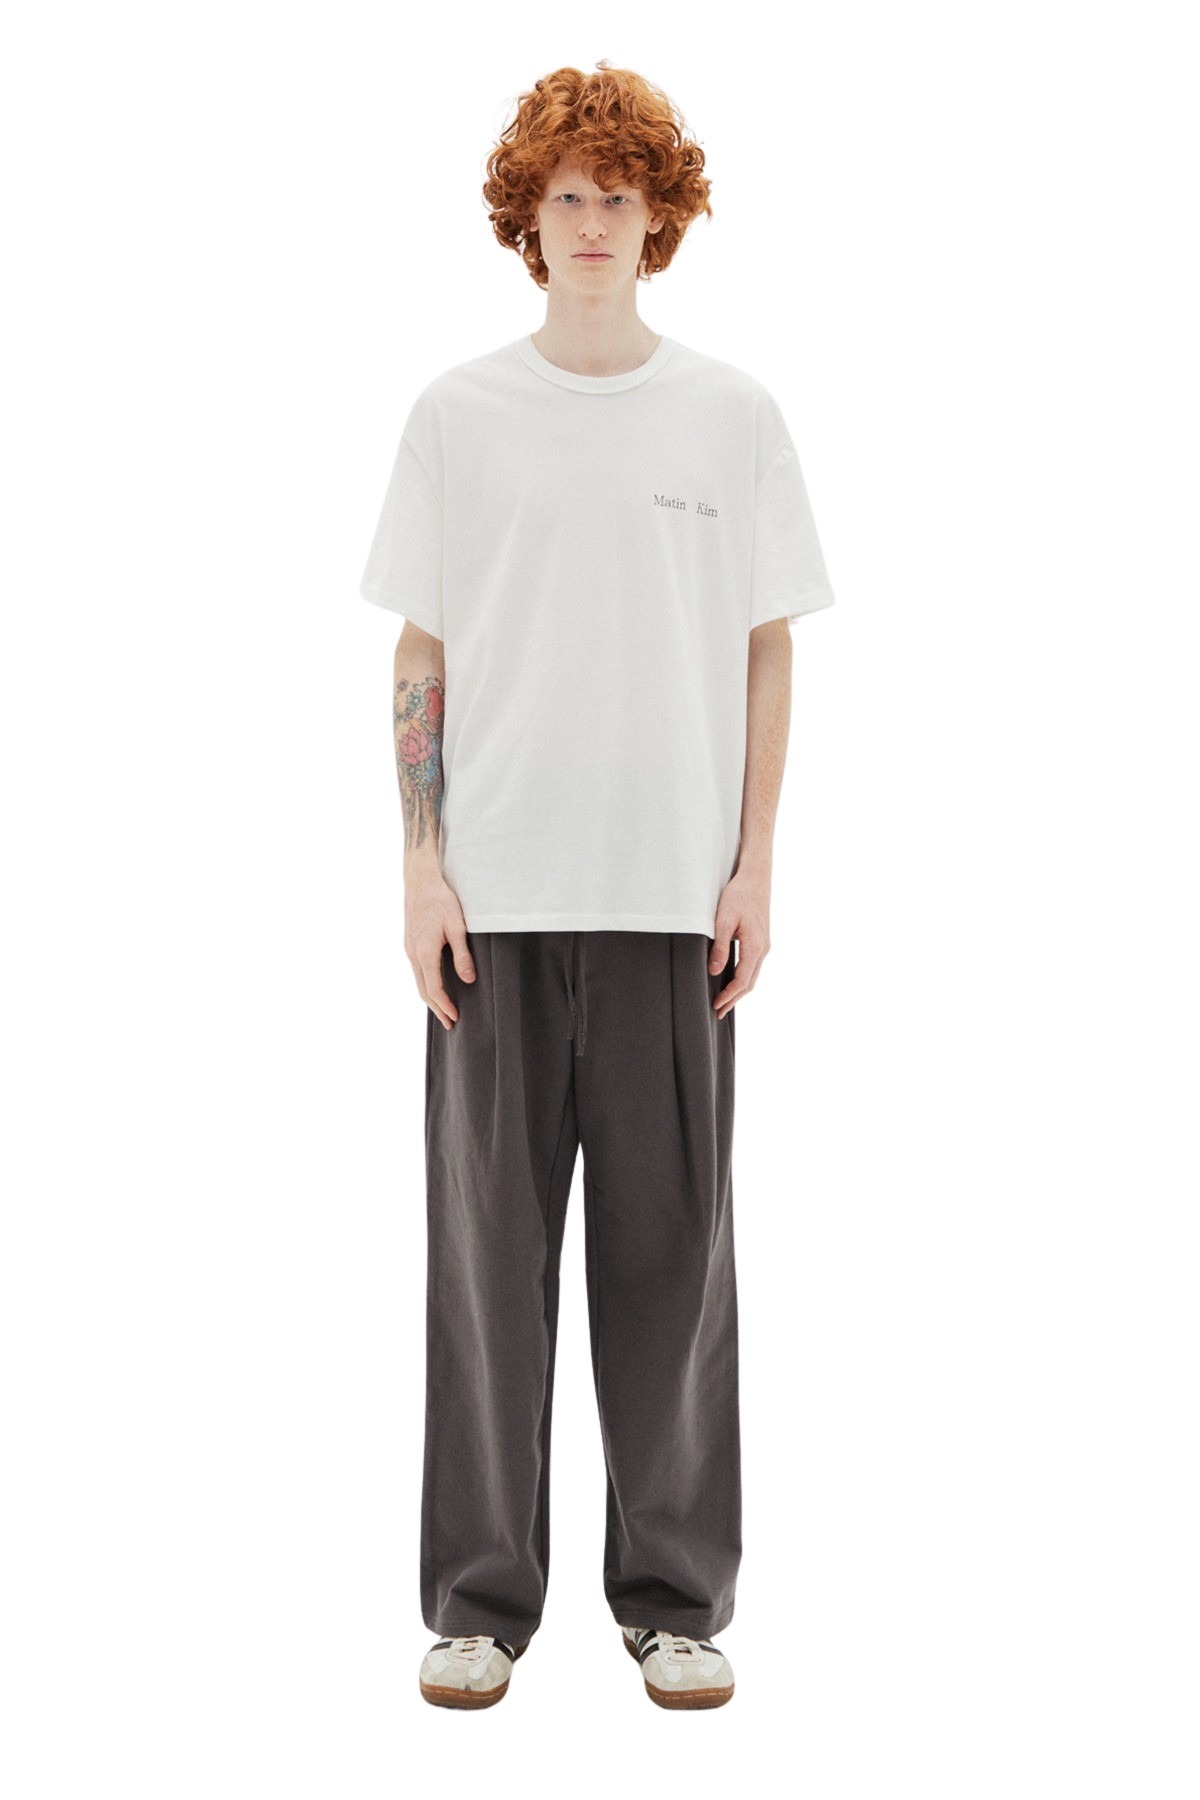 MATIN SYMBOL ONE TUCK SWEATPANTS IN CHARCOAL